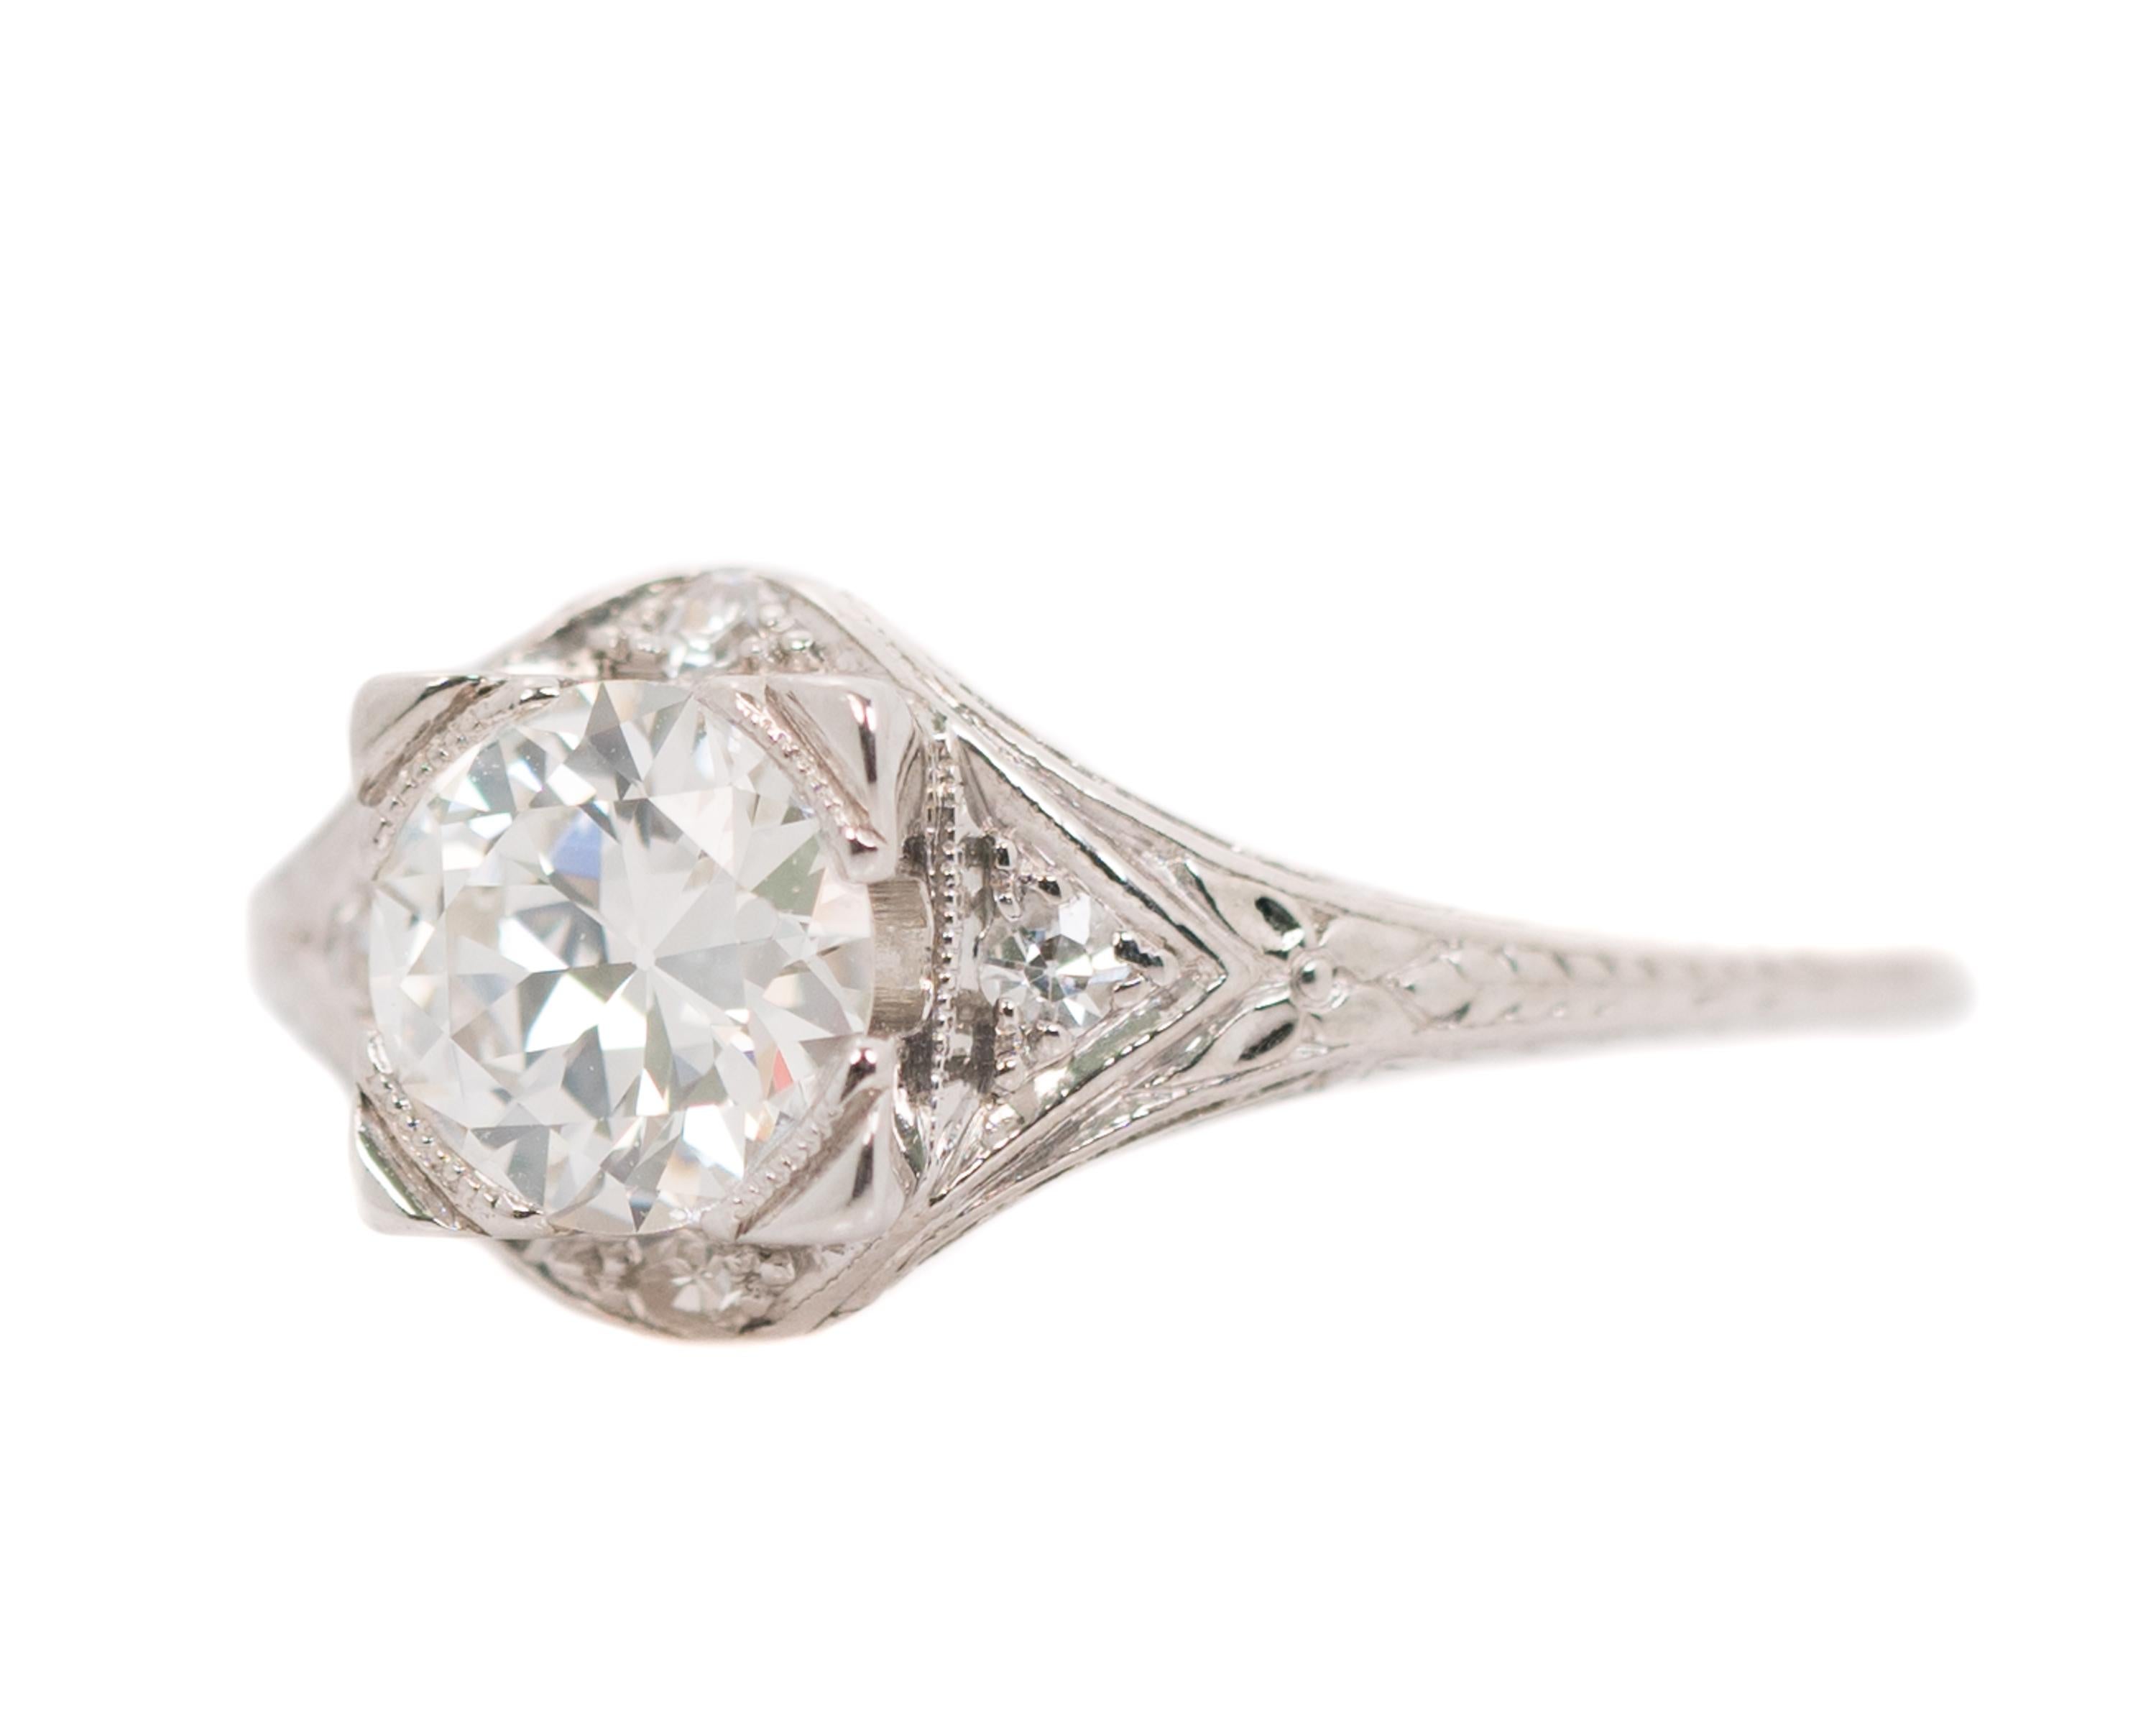 Women's 1930s 1.01 Carat Diamond and Platinum Engagement Ring For Sale